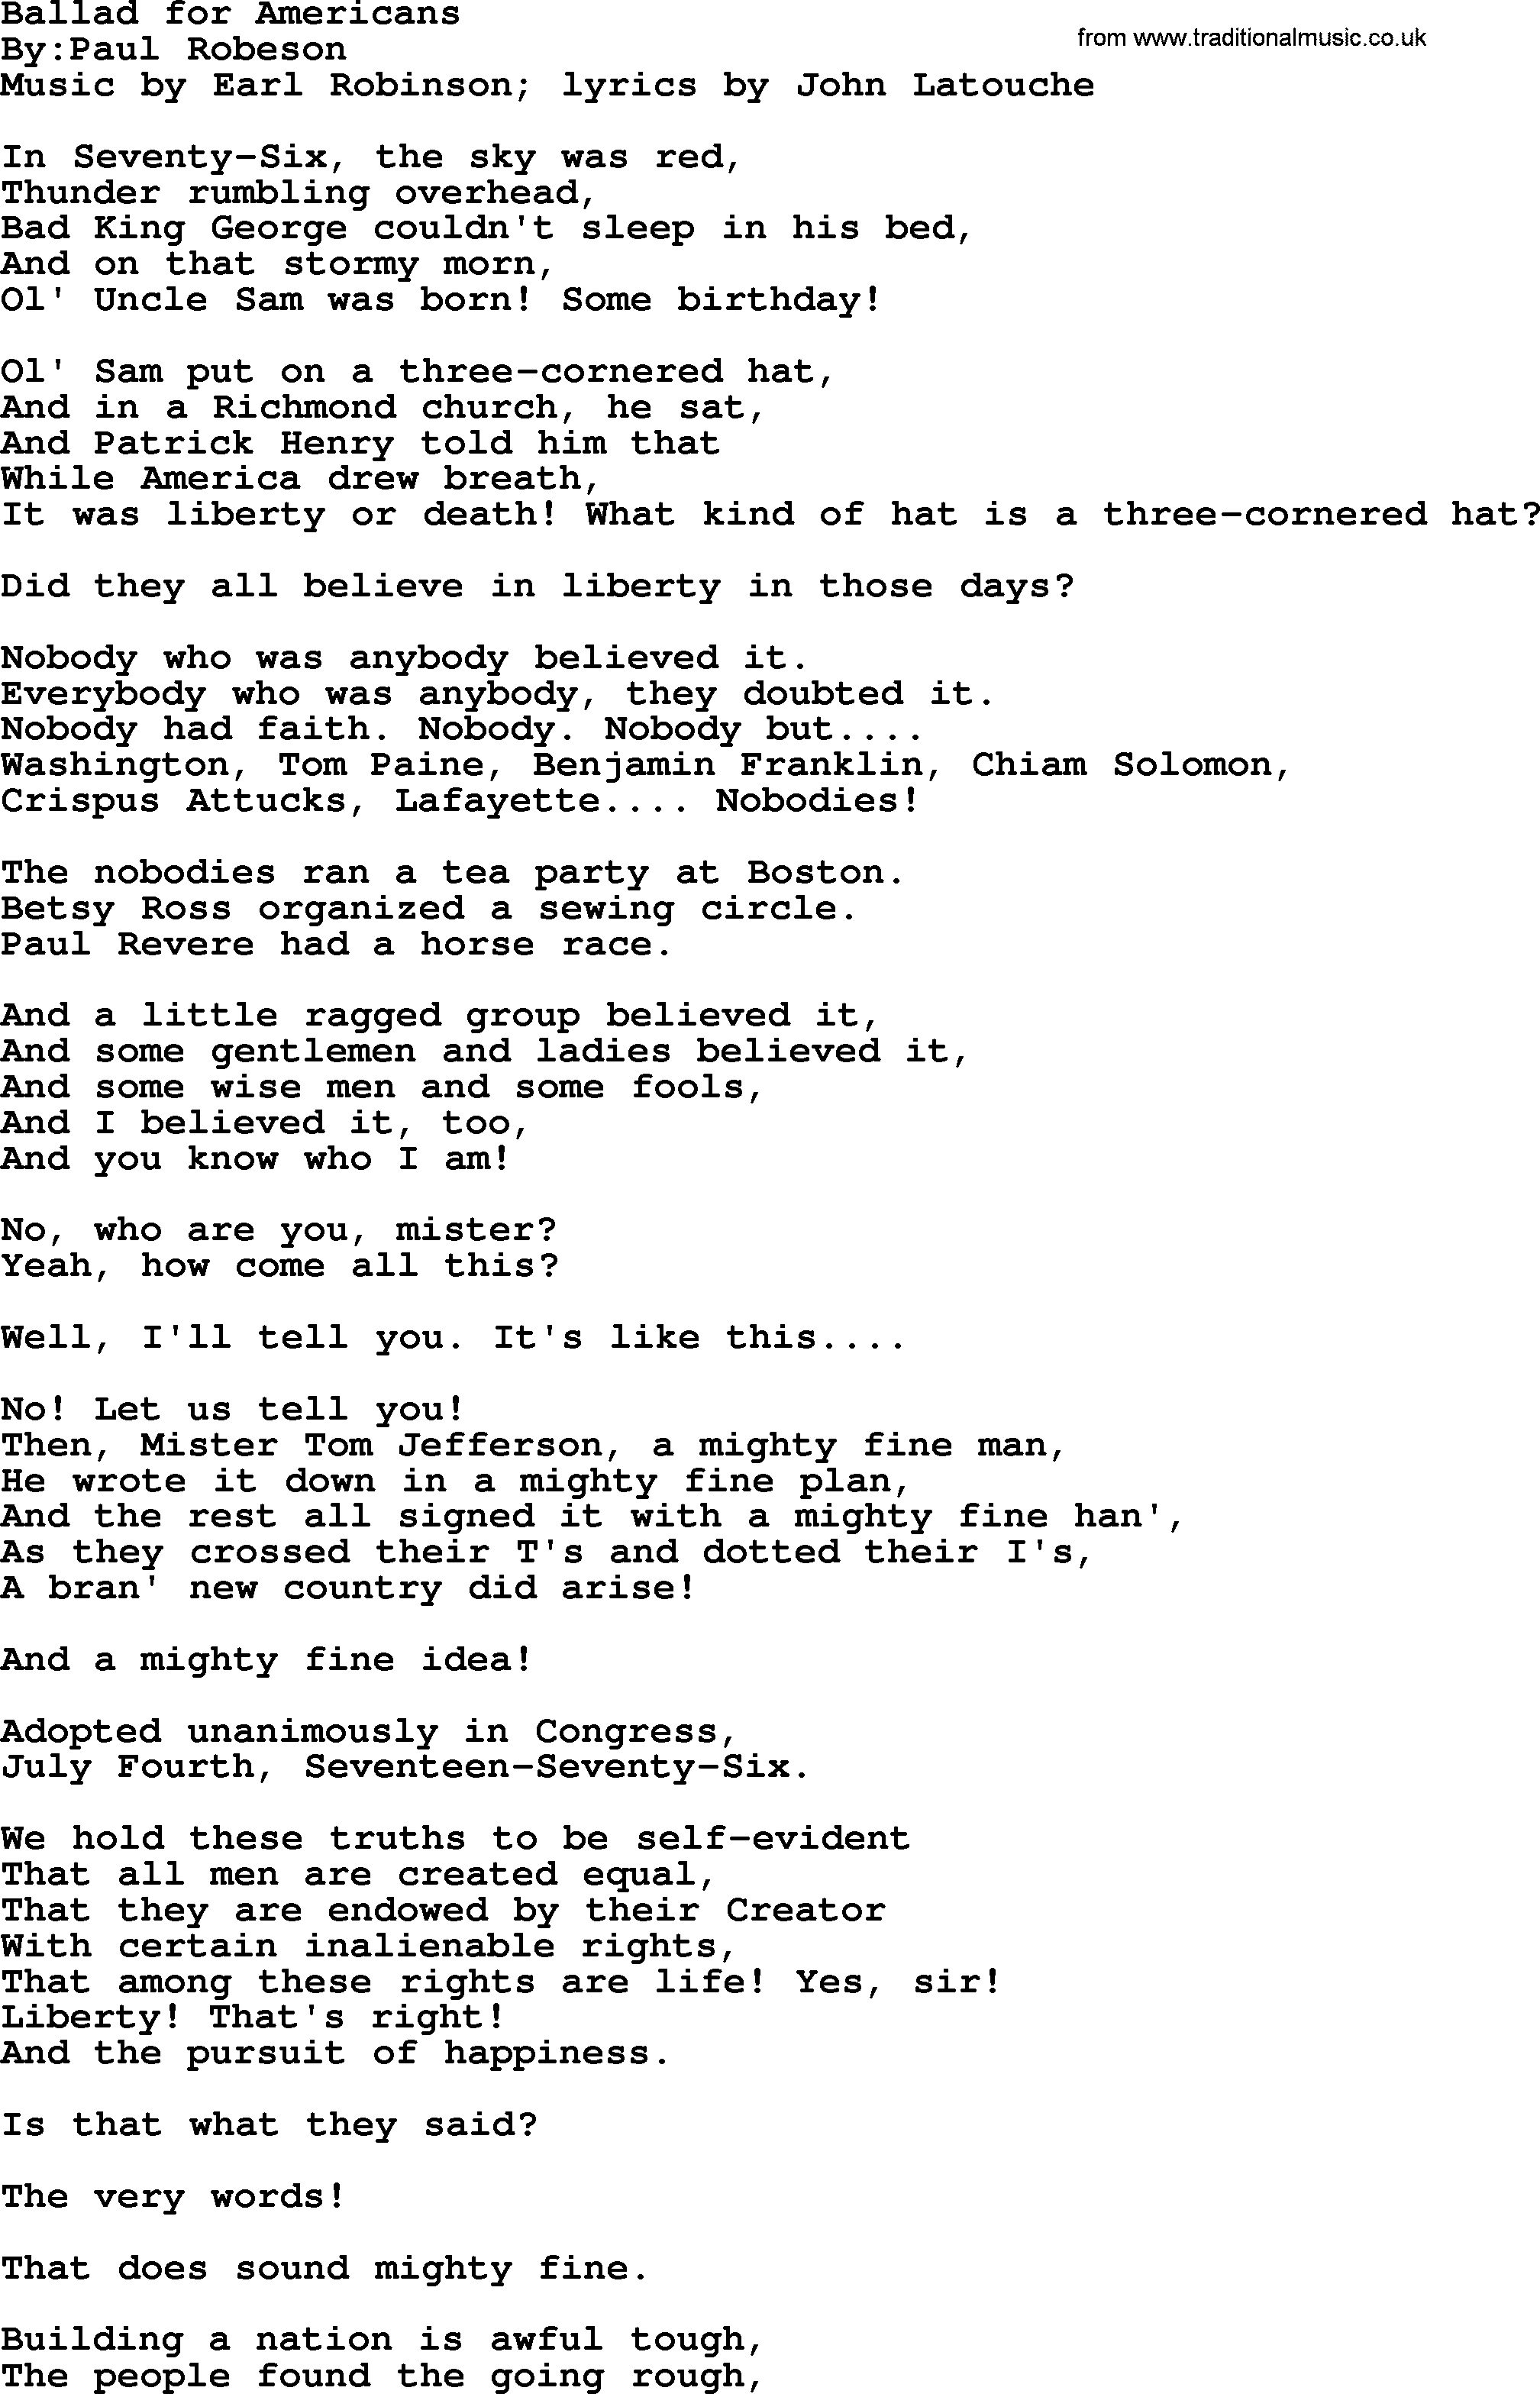 Political, Solidarity, Workers or Union song: Ballad For Americans, lyrics